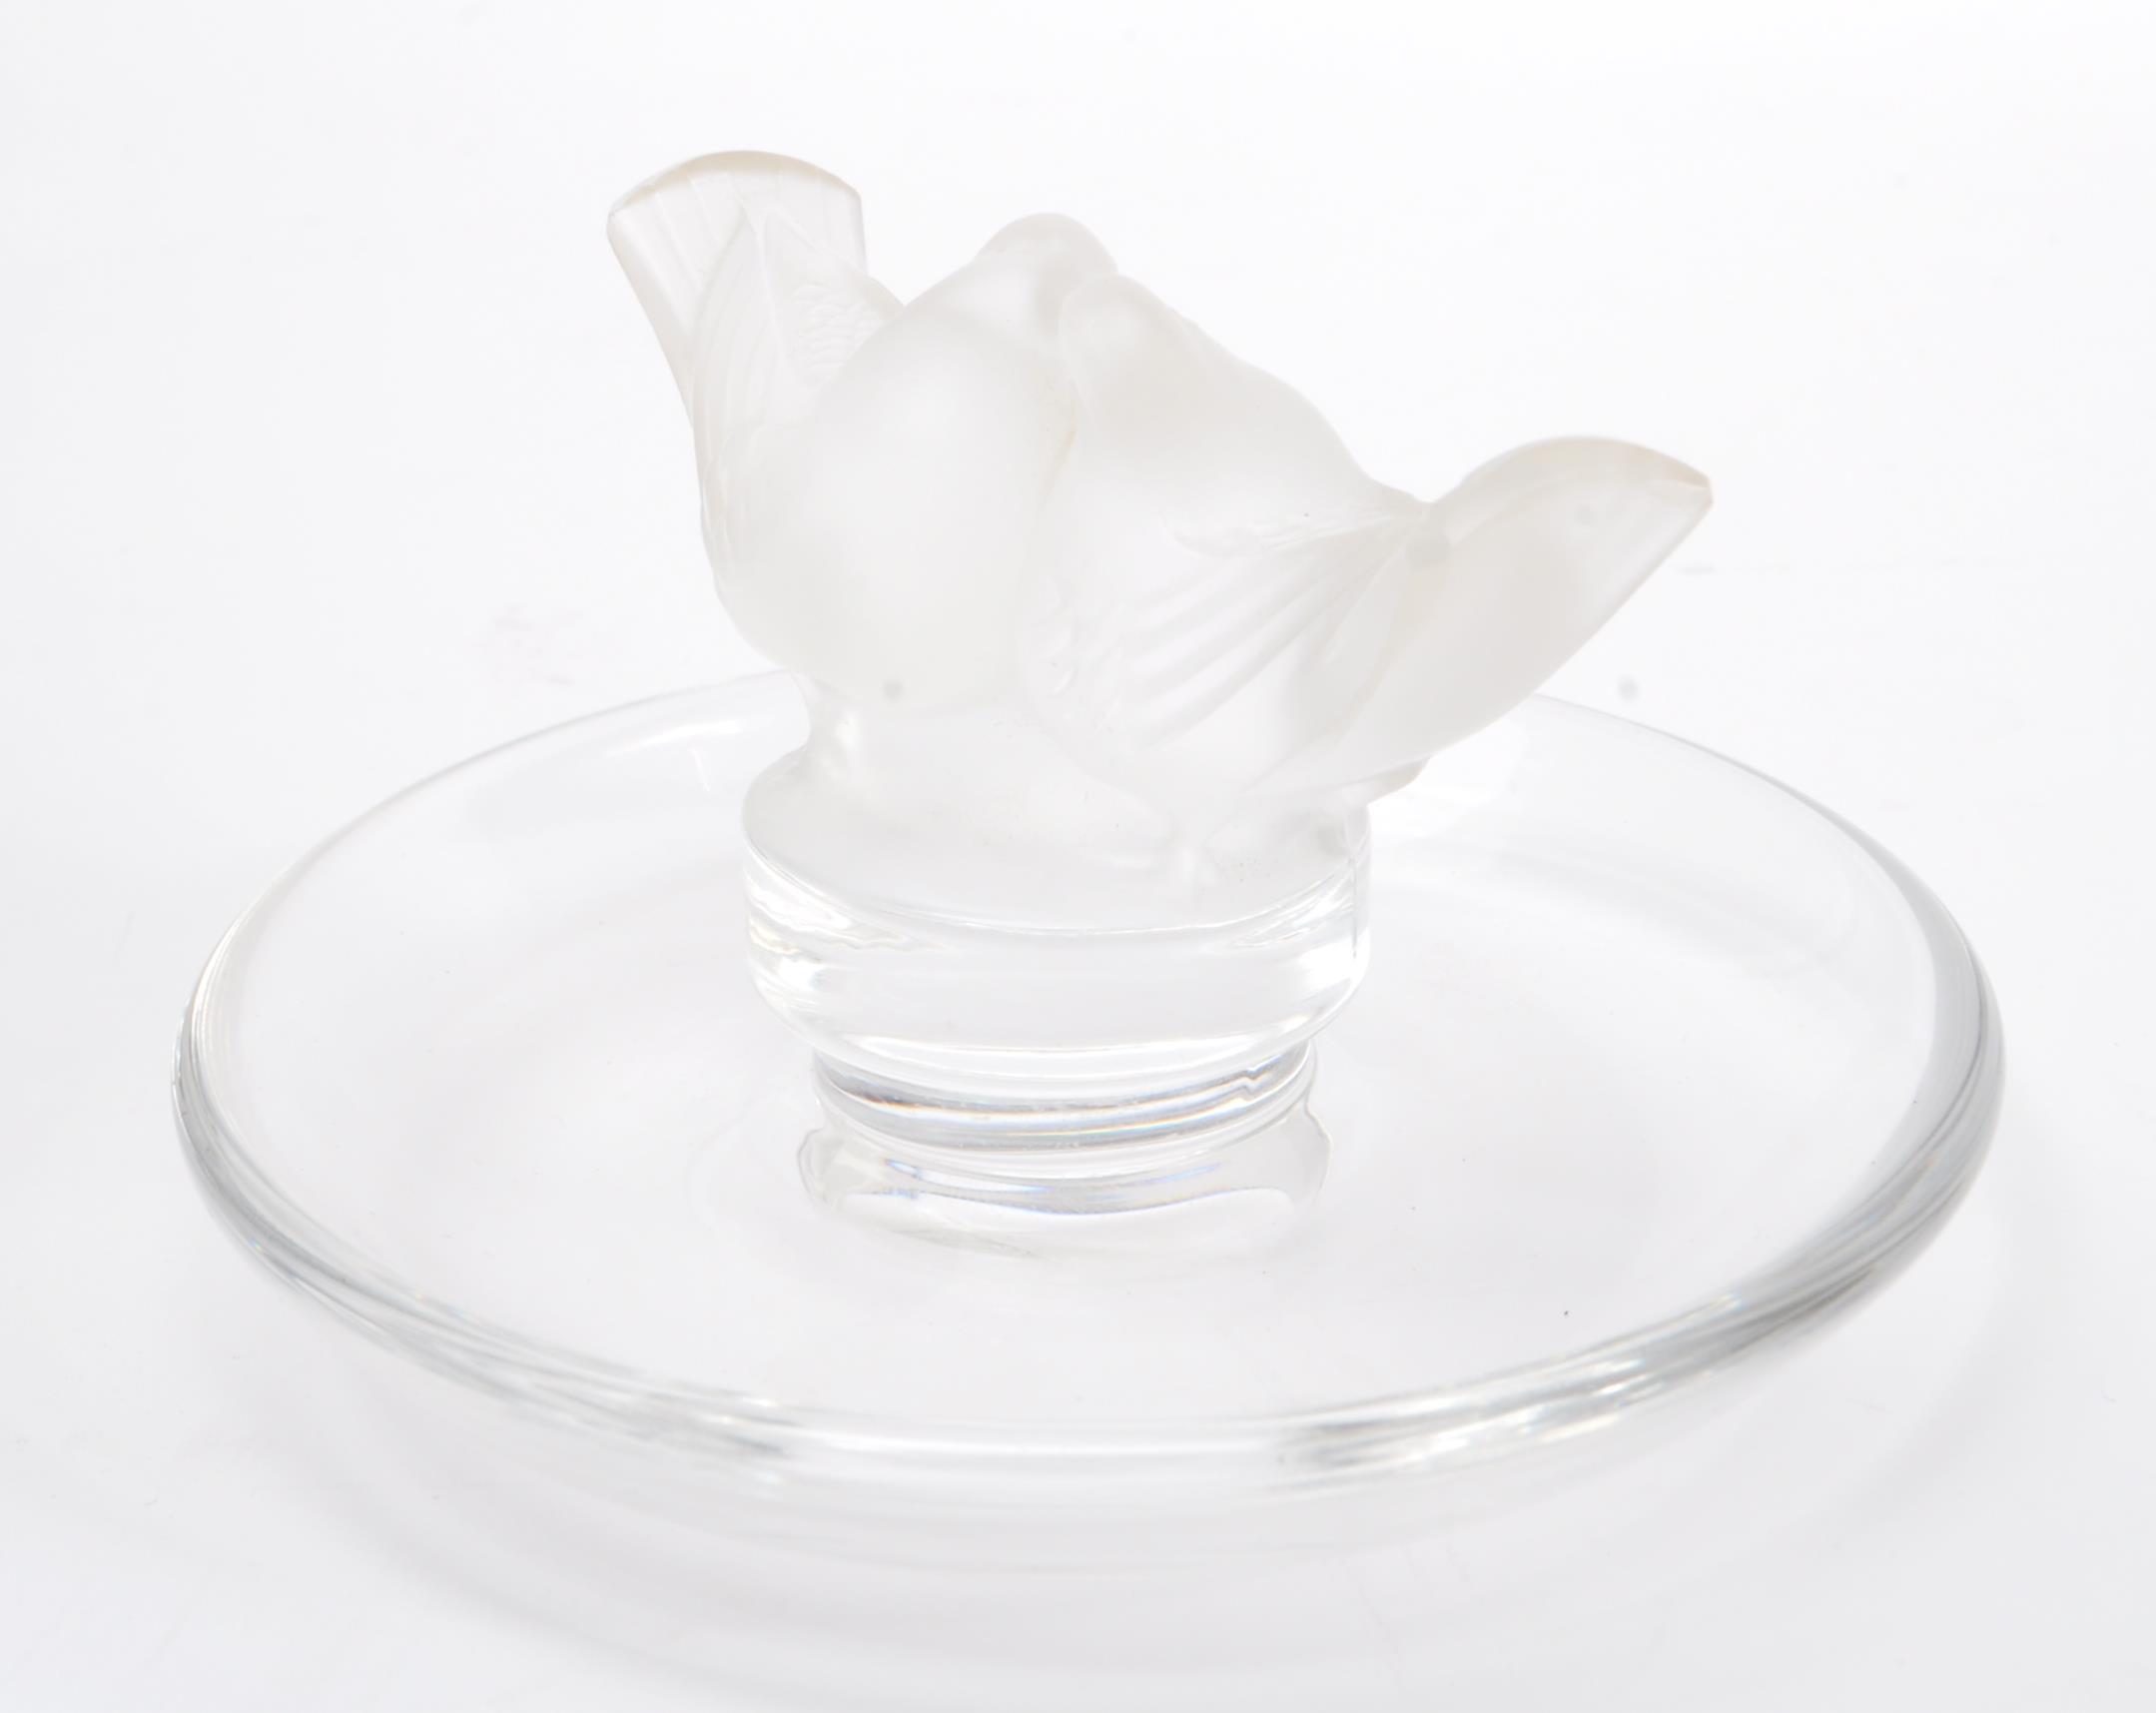 LALIQUE - 20TH CENTURY GLASS BIRDS IN CIRCULAR DISH - Image 2 of 5